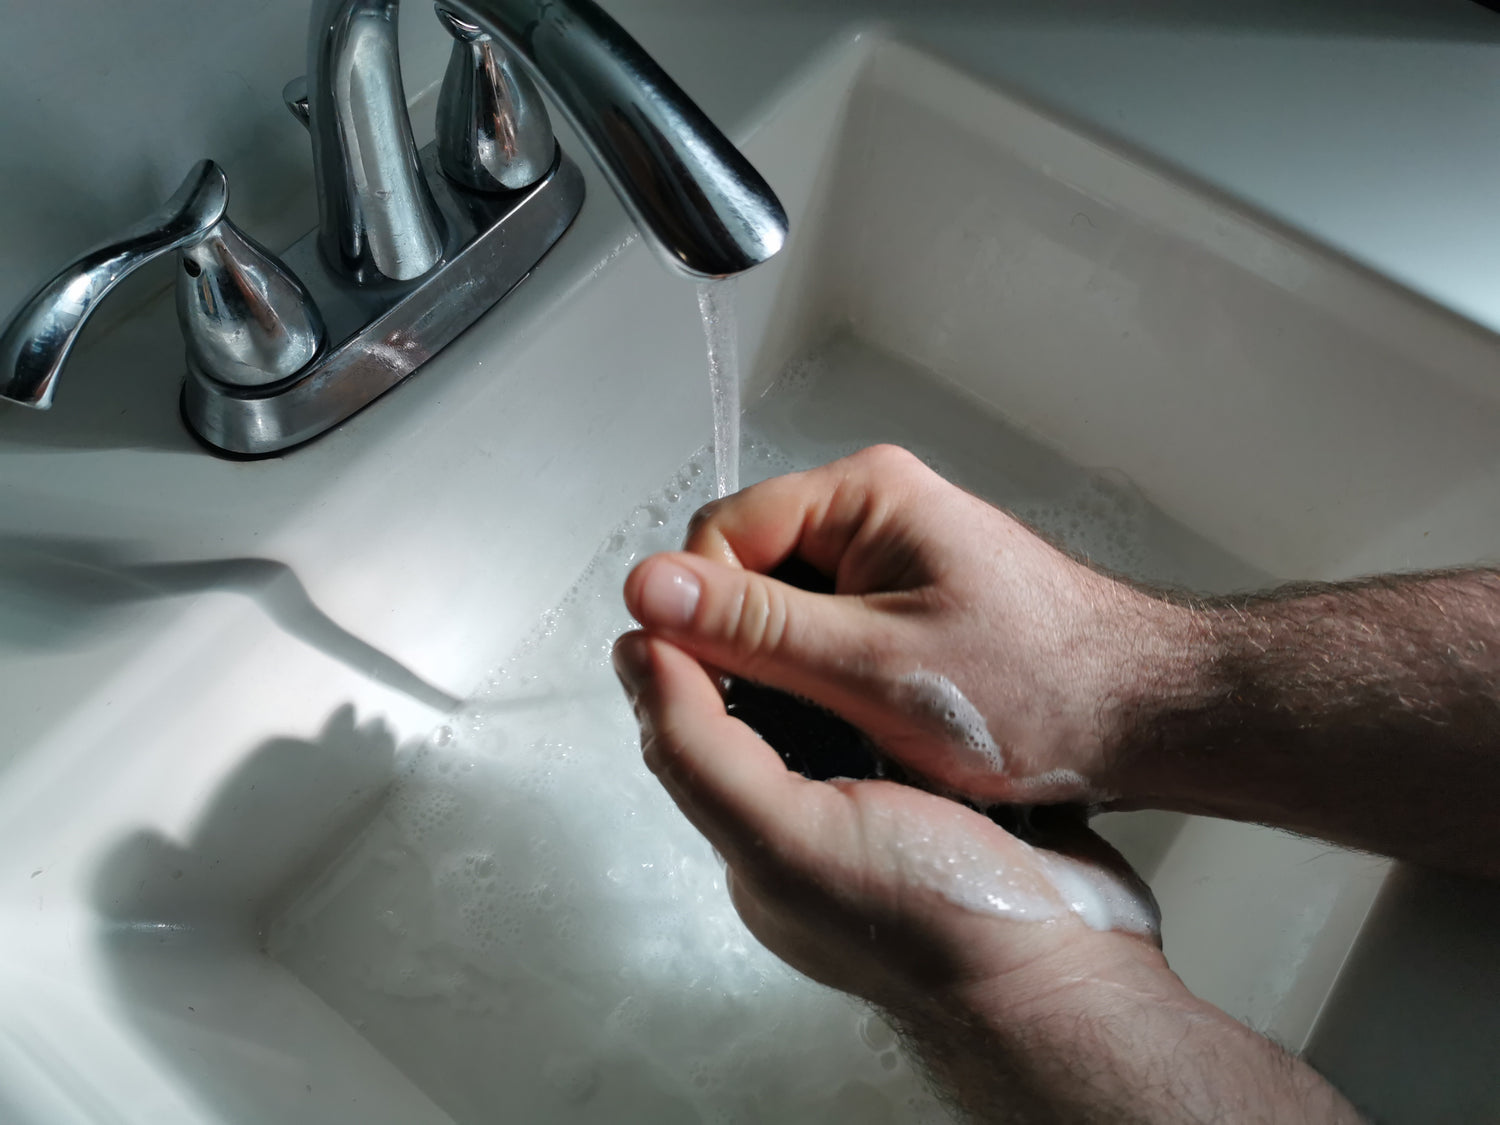 5 Ways to Save Your Hands from Drying Out When Washing & Sanitizing